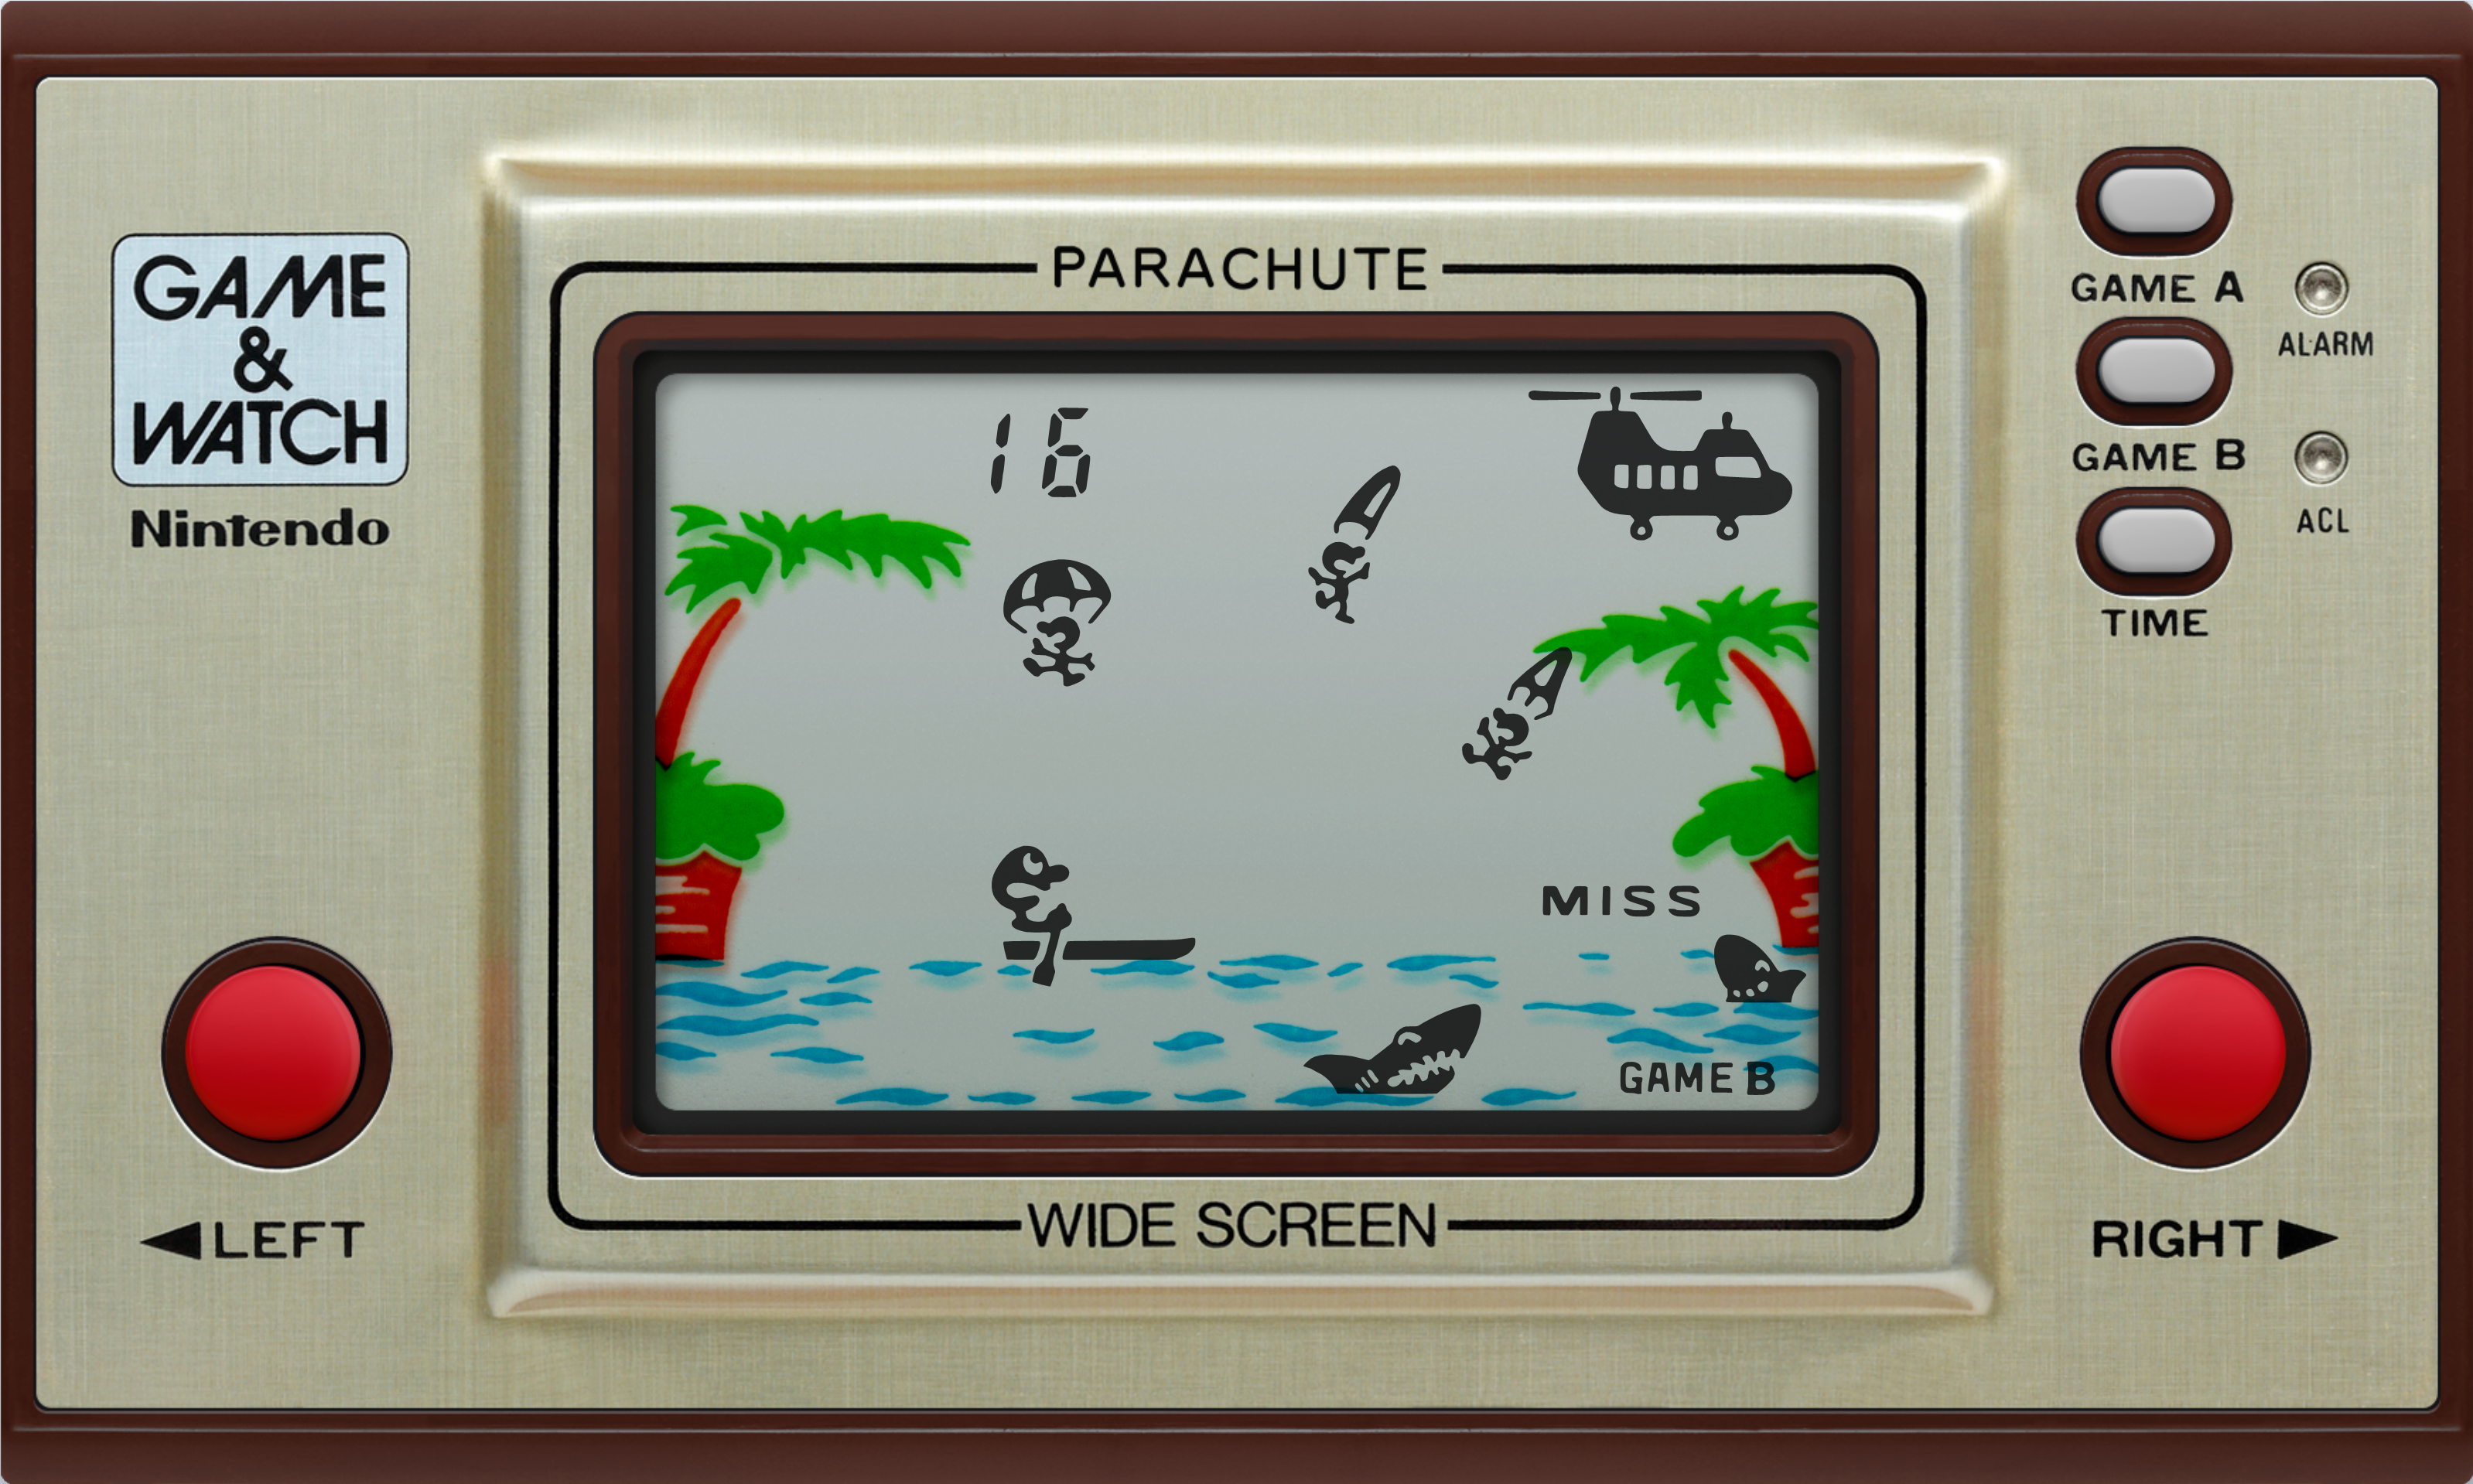 Watch a game it is. Nintendo game & watch. Game&watch Parachute. Game and watch. Игра электроника Нинтендо.